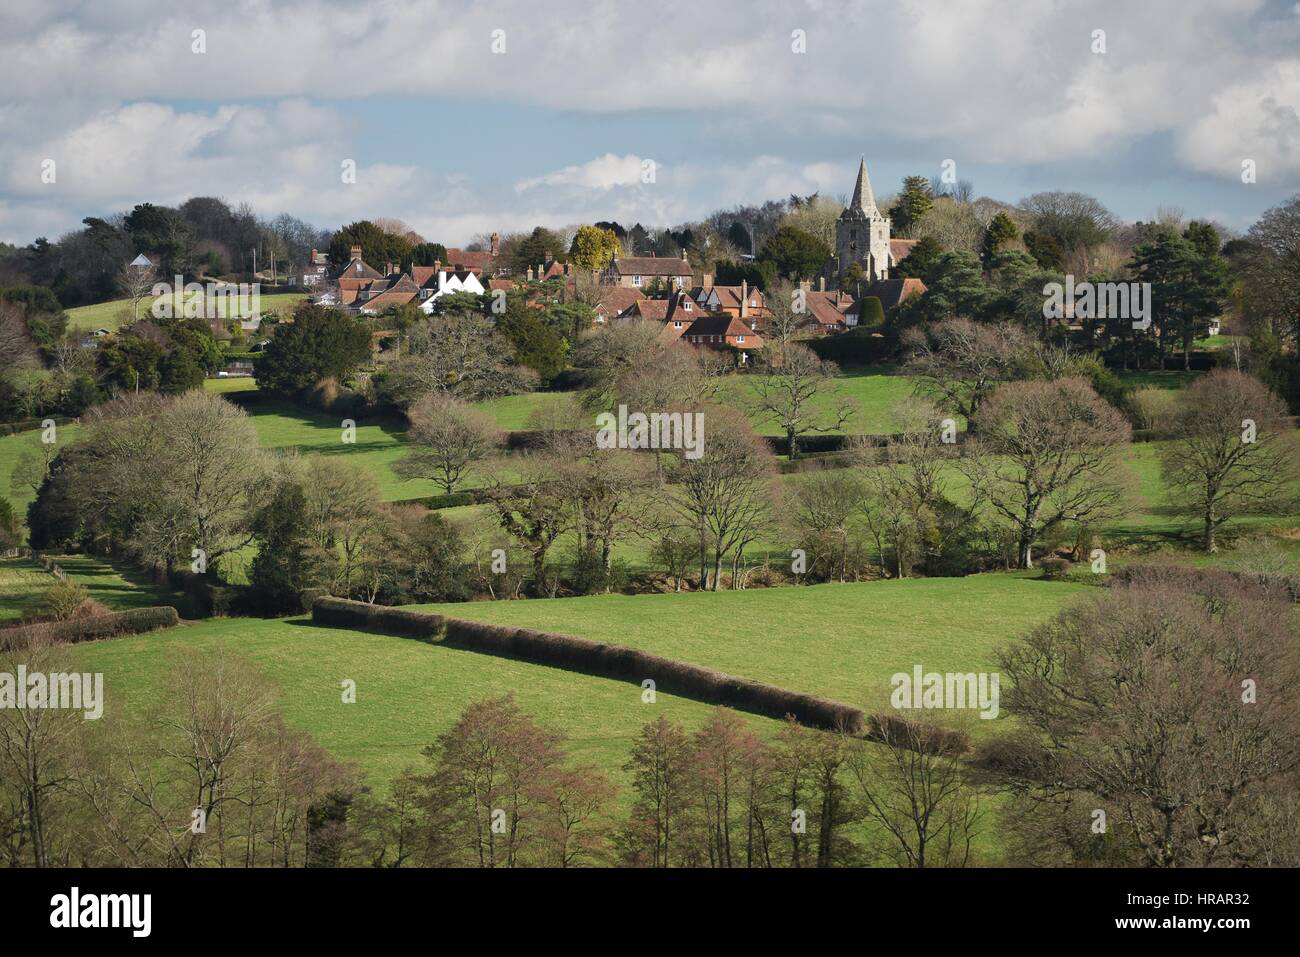 Dallington, East Sussex, UK 28th February 2017. Bright sunshine and blue sly over the pretty hill top village of Dallington, East Sussex, UK. Credit: Peter Cripps/Alamy Live News Stock Photo